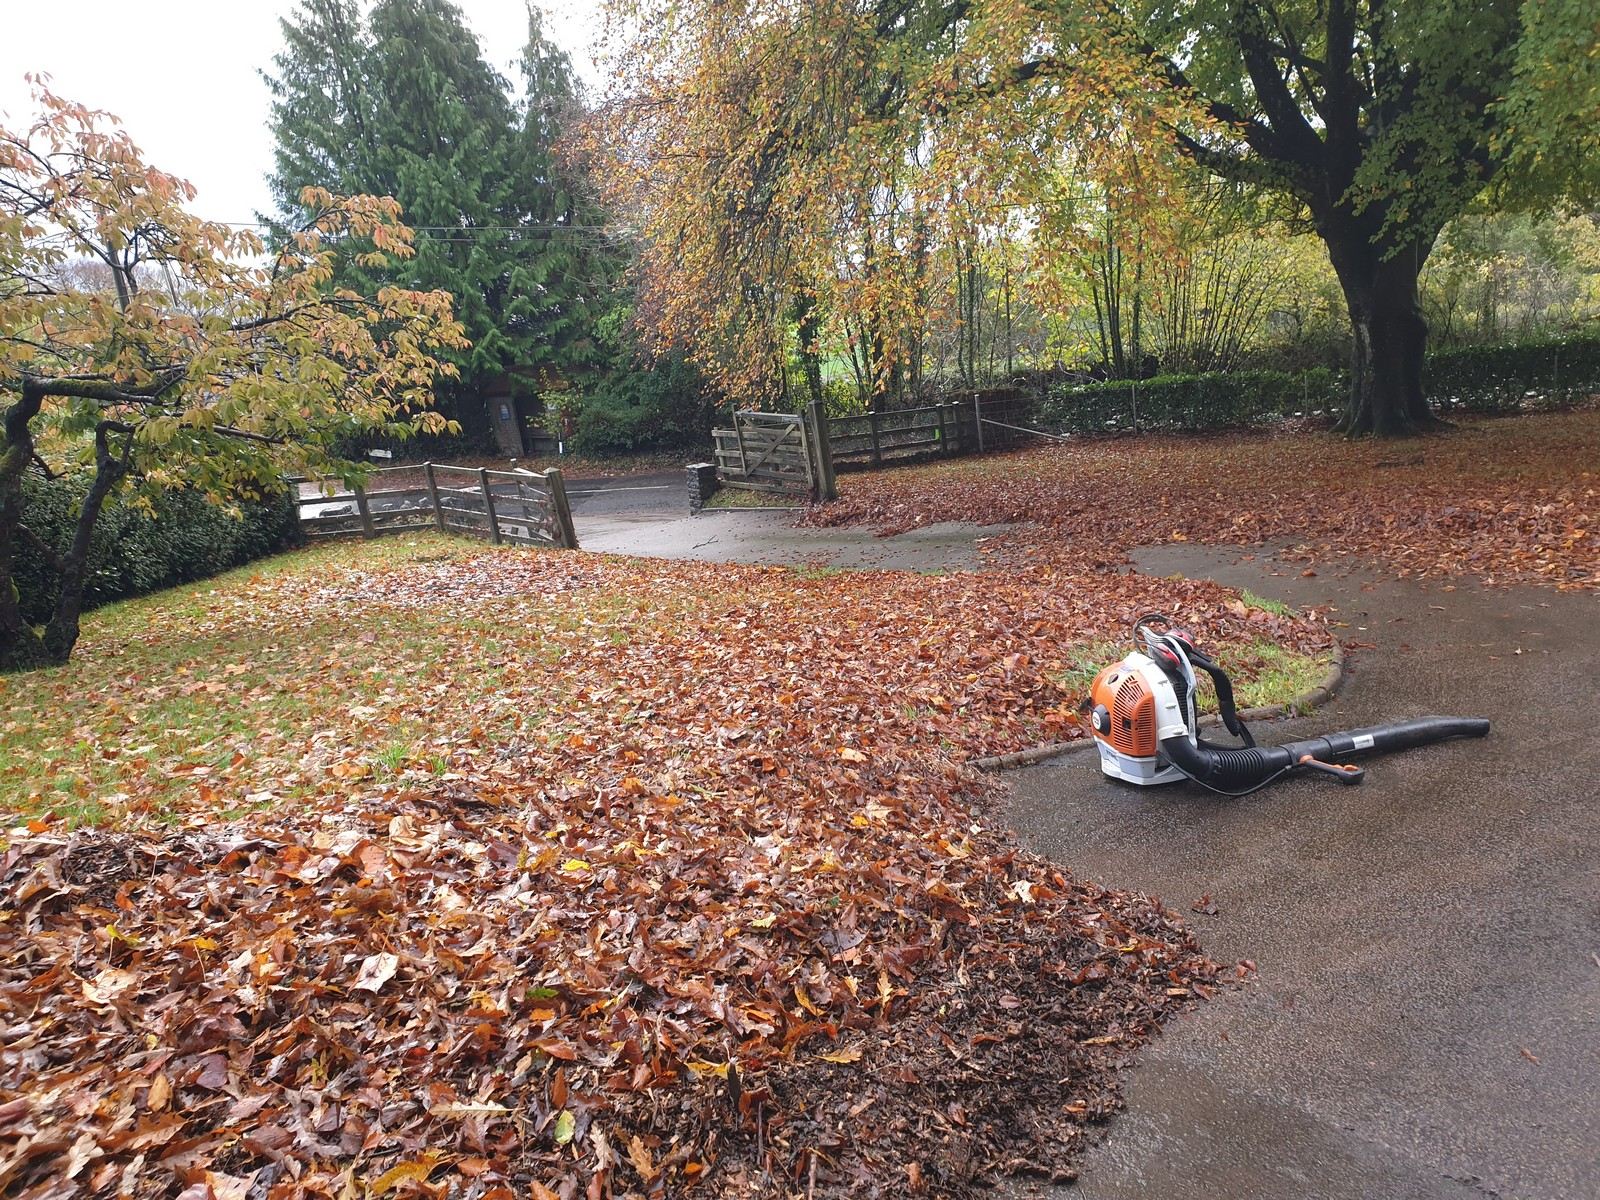 Clearing Autumn leaves in a woodland garden